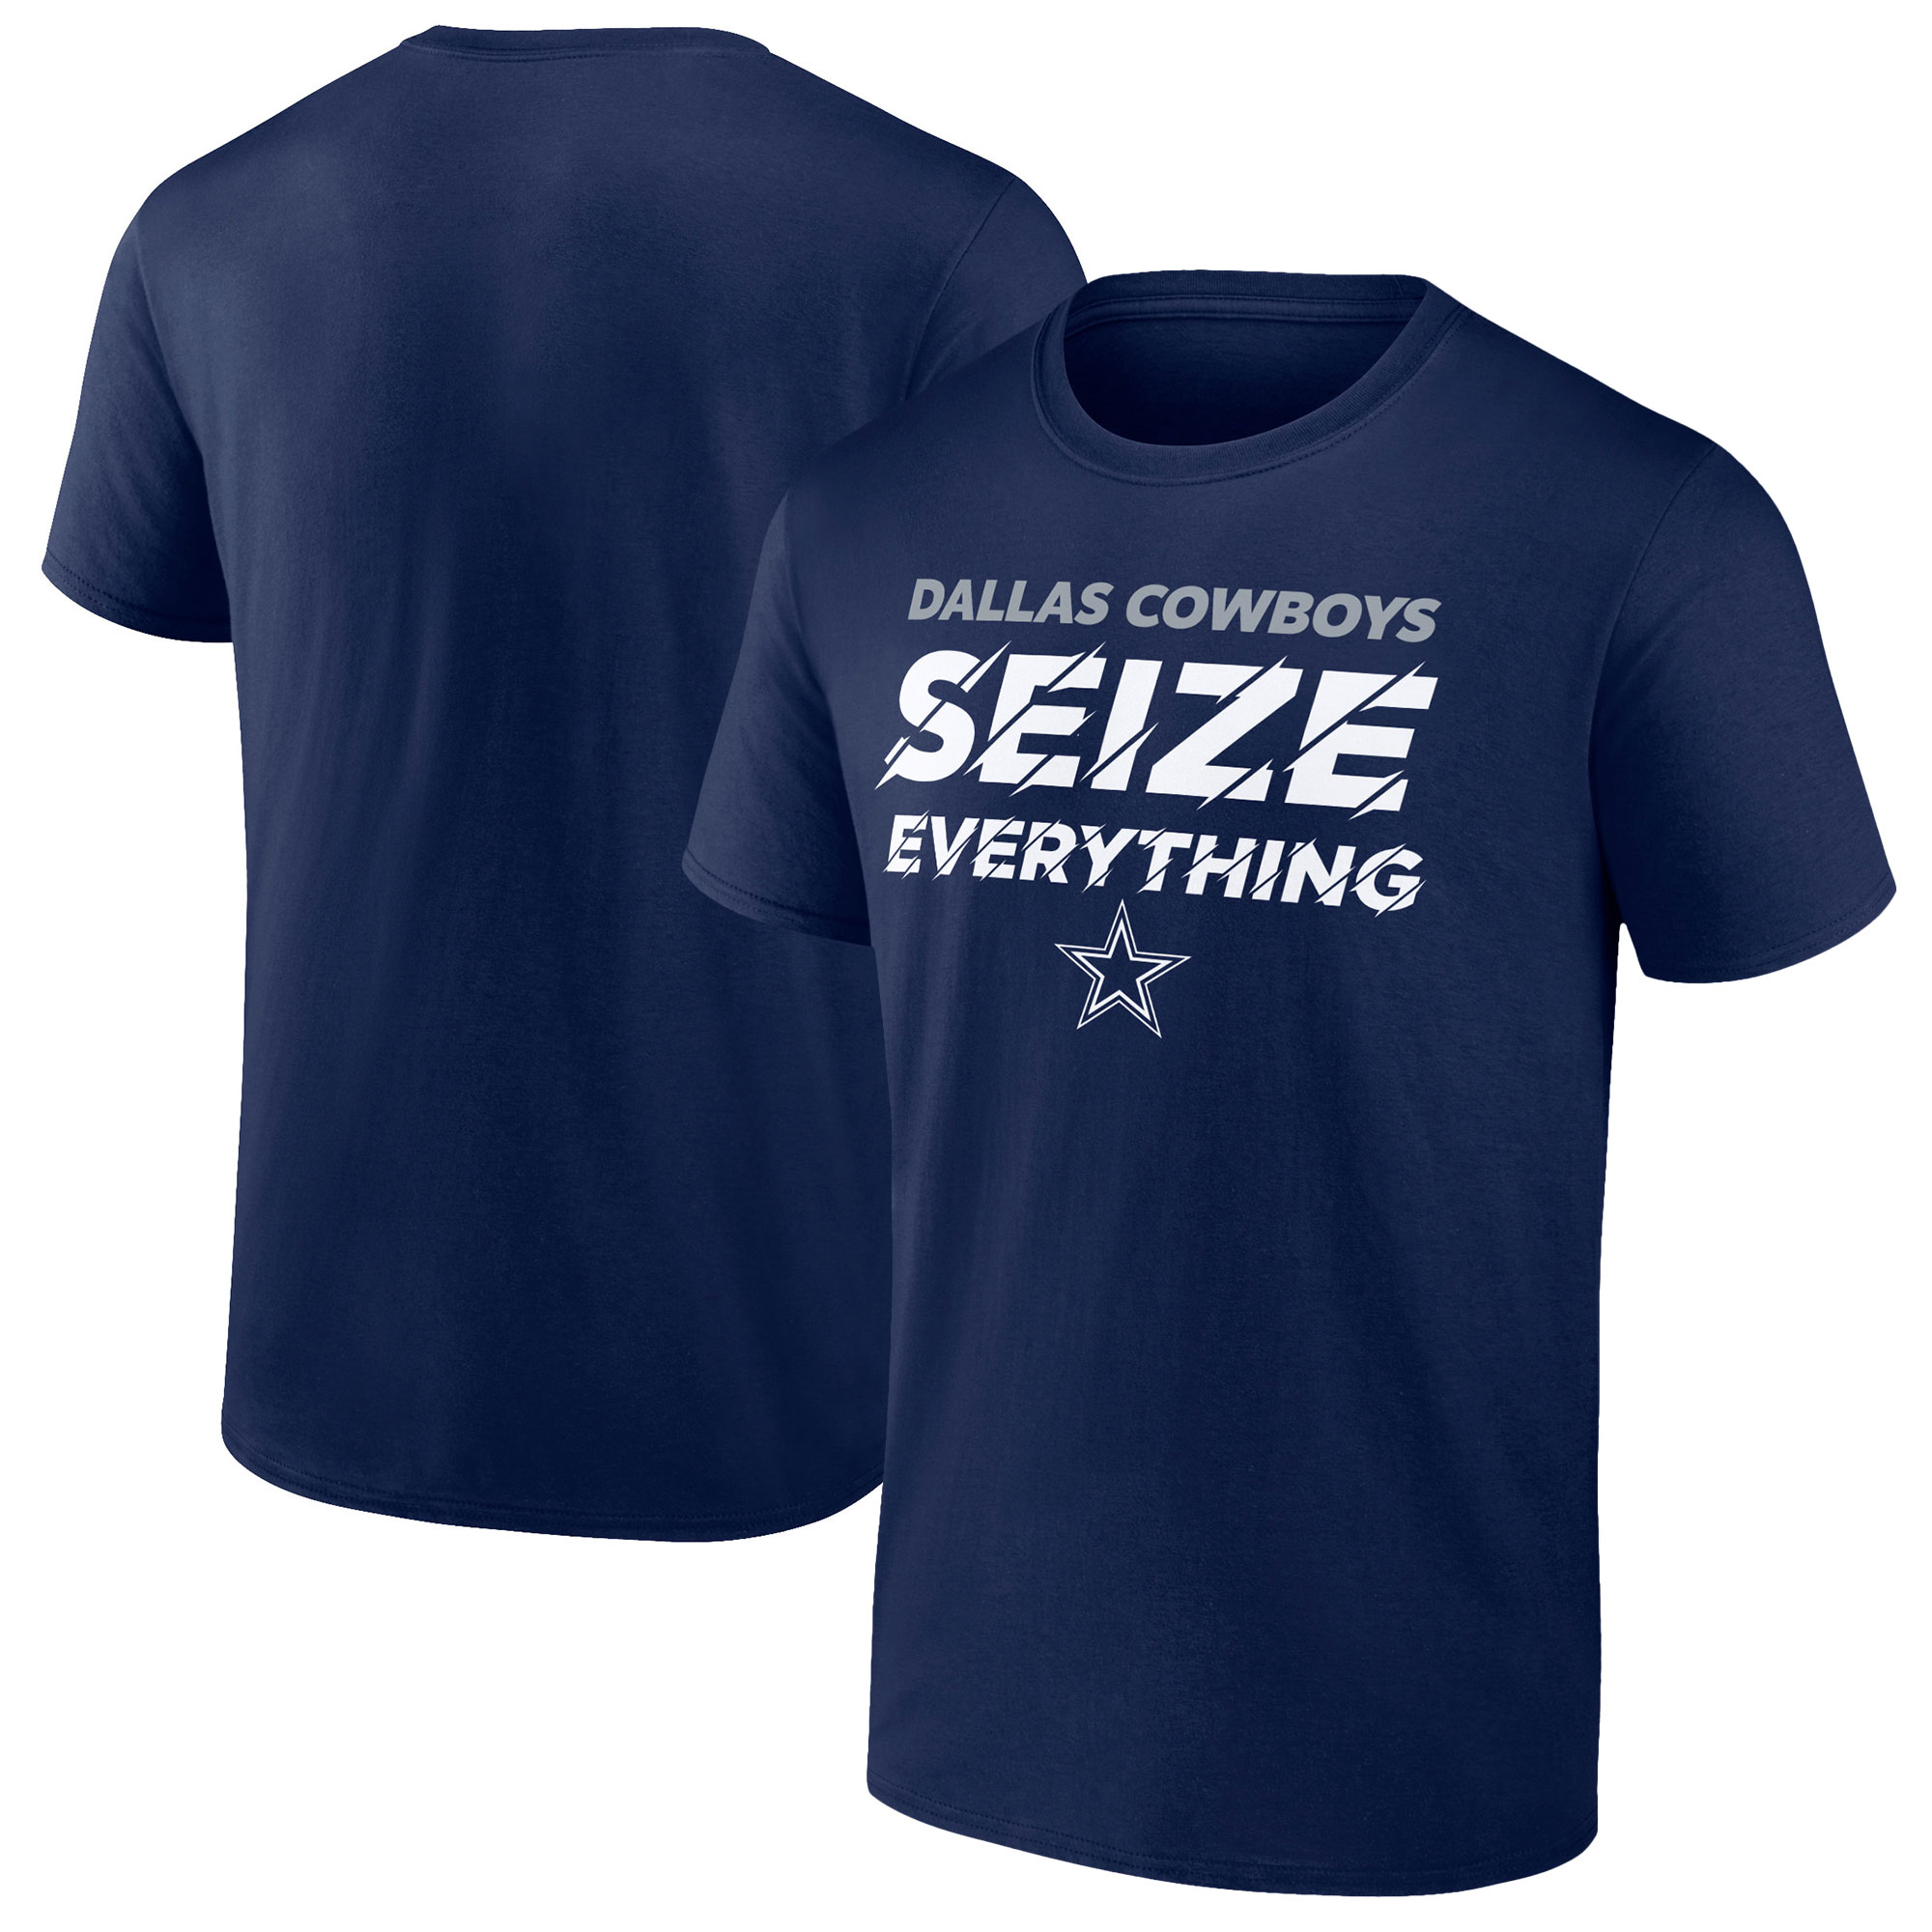 Men's Fanatics Branded  Navy Dallas Cowboys Seize Everything T-Shirt - image 1 of 3